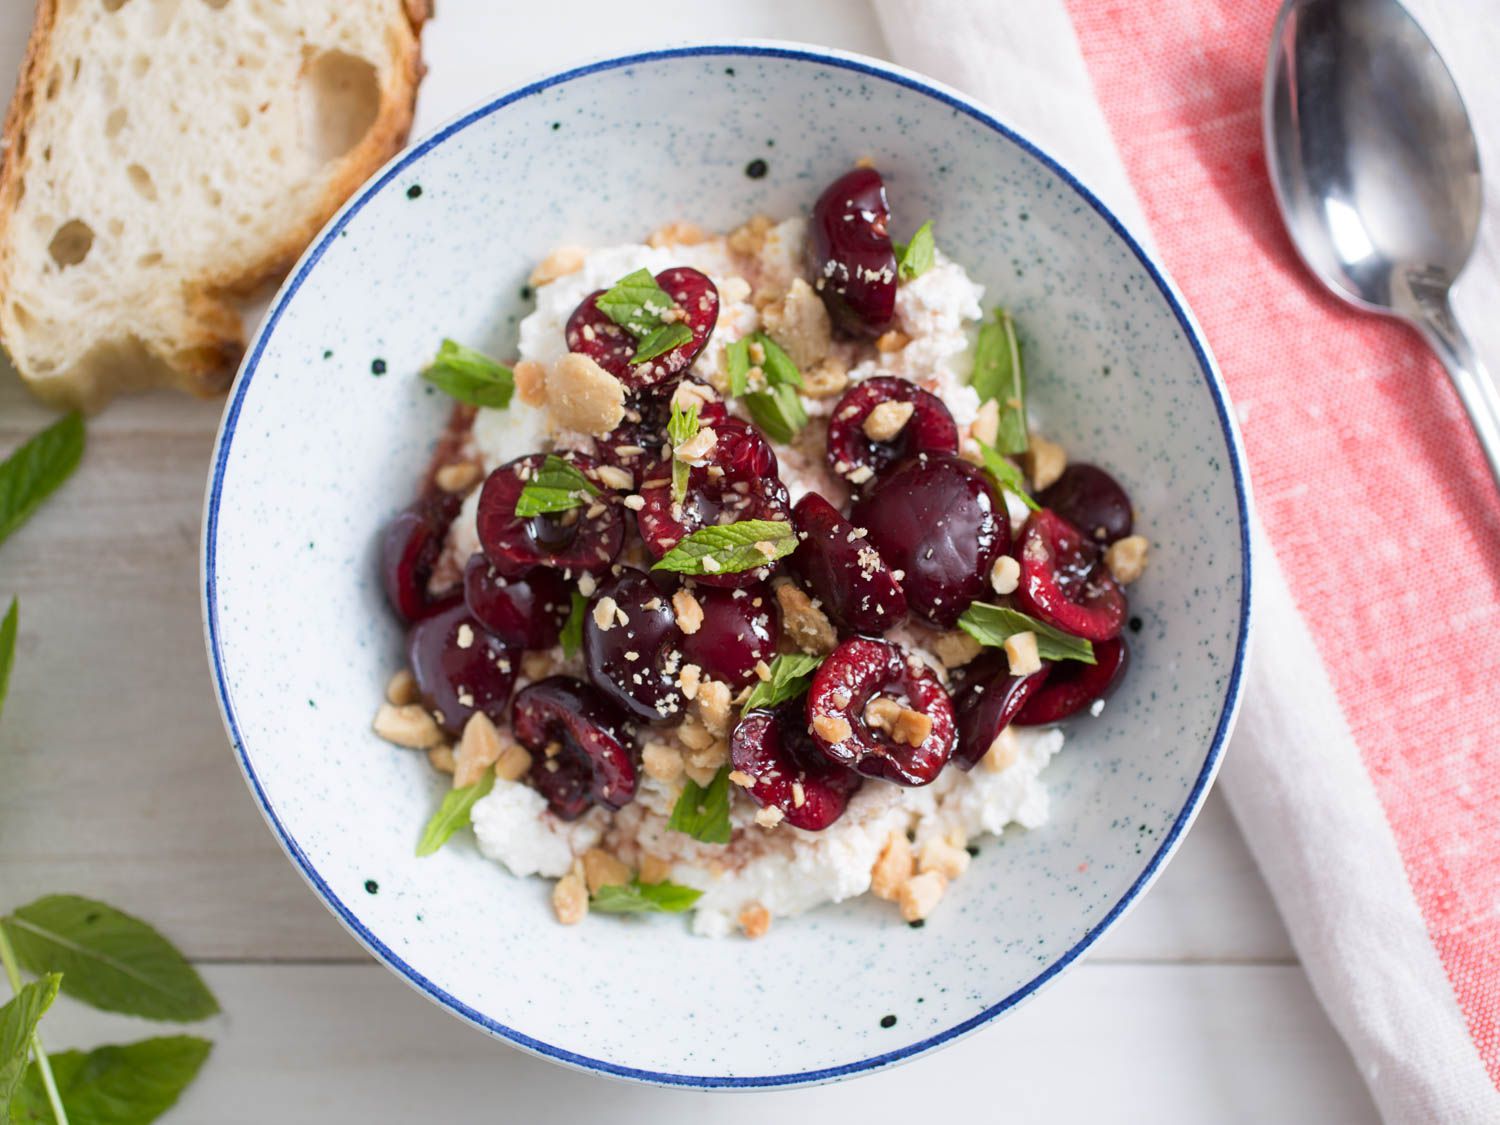 Sweet-Sour Macerated Cherries With Marcona Almonds